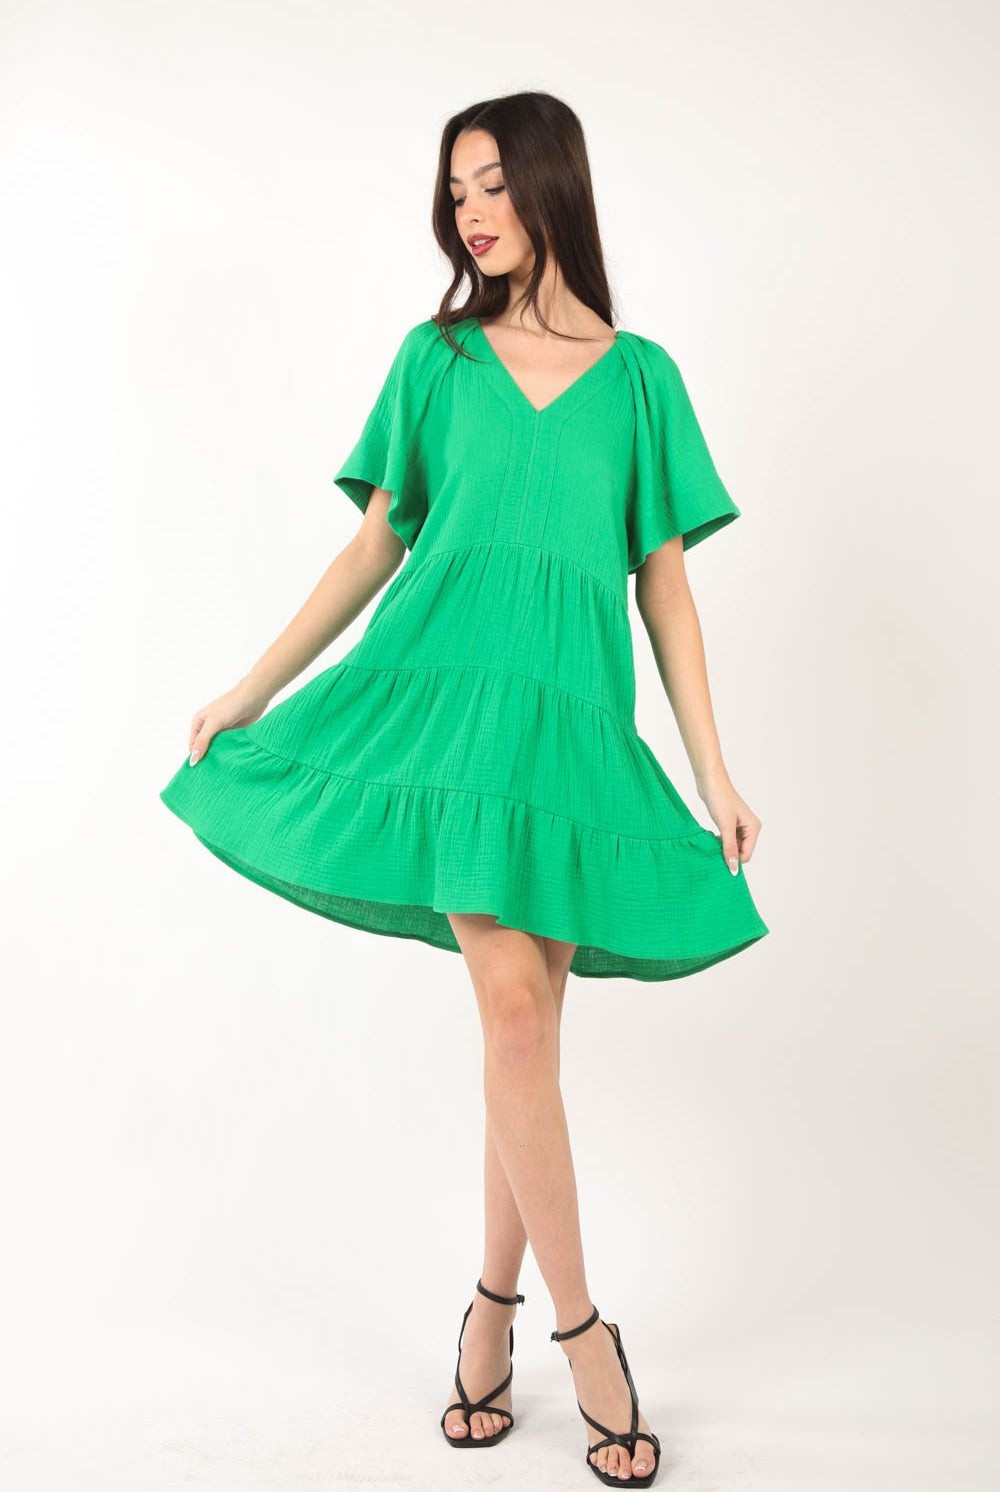 Model wearing a vibrant green, tiered dress with a V-neckline and short sleeves, perfect for a fresh and stylish summer look.